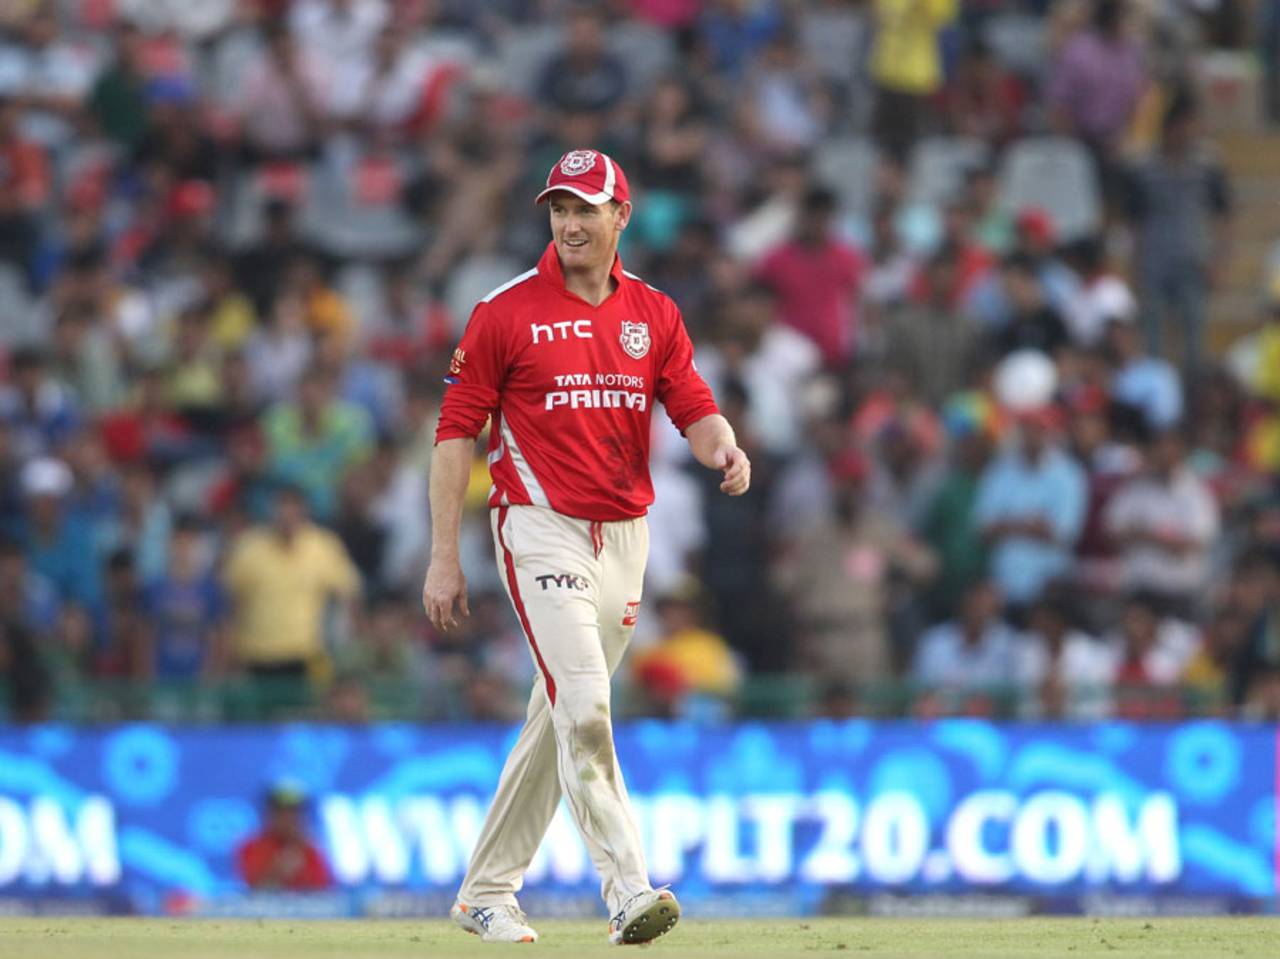 George Bailey has captained Kings XI Punjab previously in the IPL&nbsp;&nbsp;&bull;&nbsp;&nbsp;BCCI